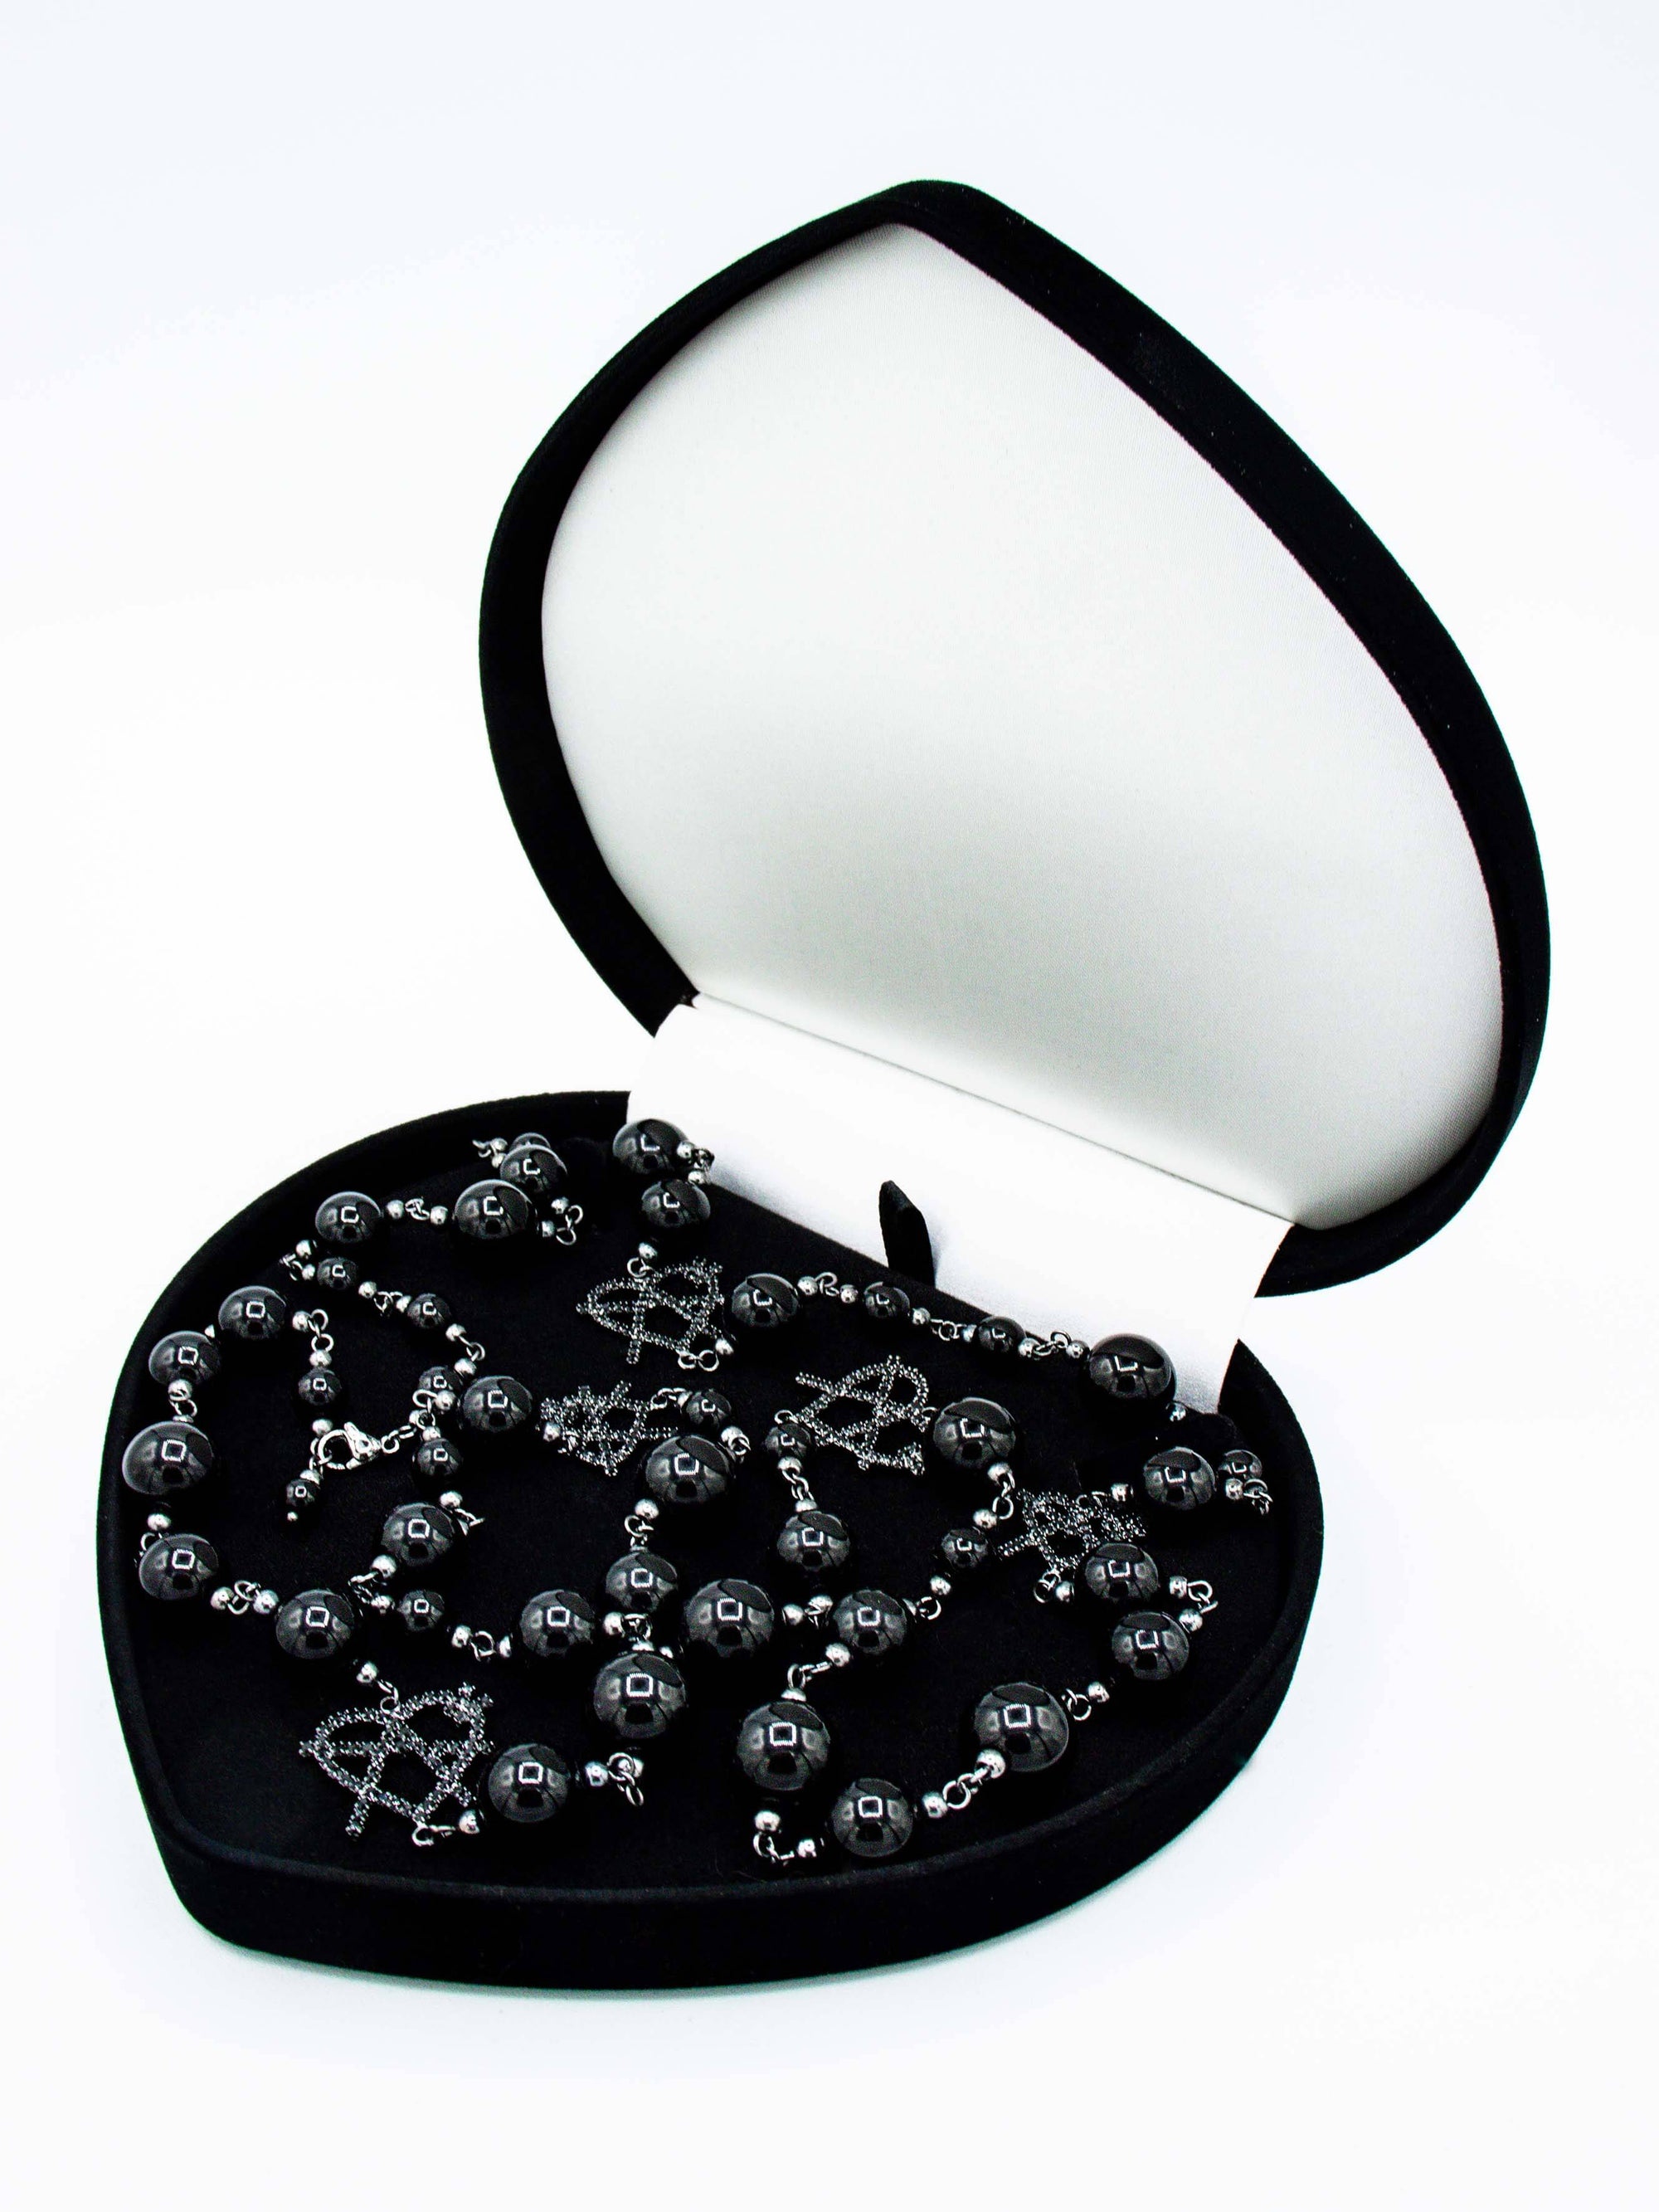 Black iGirl Pearls shown in black velvet box that the product comes in